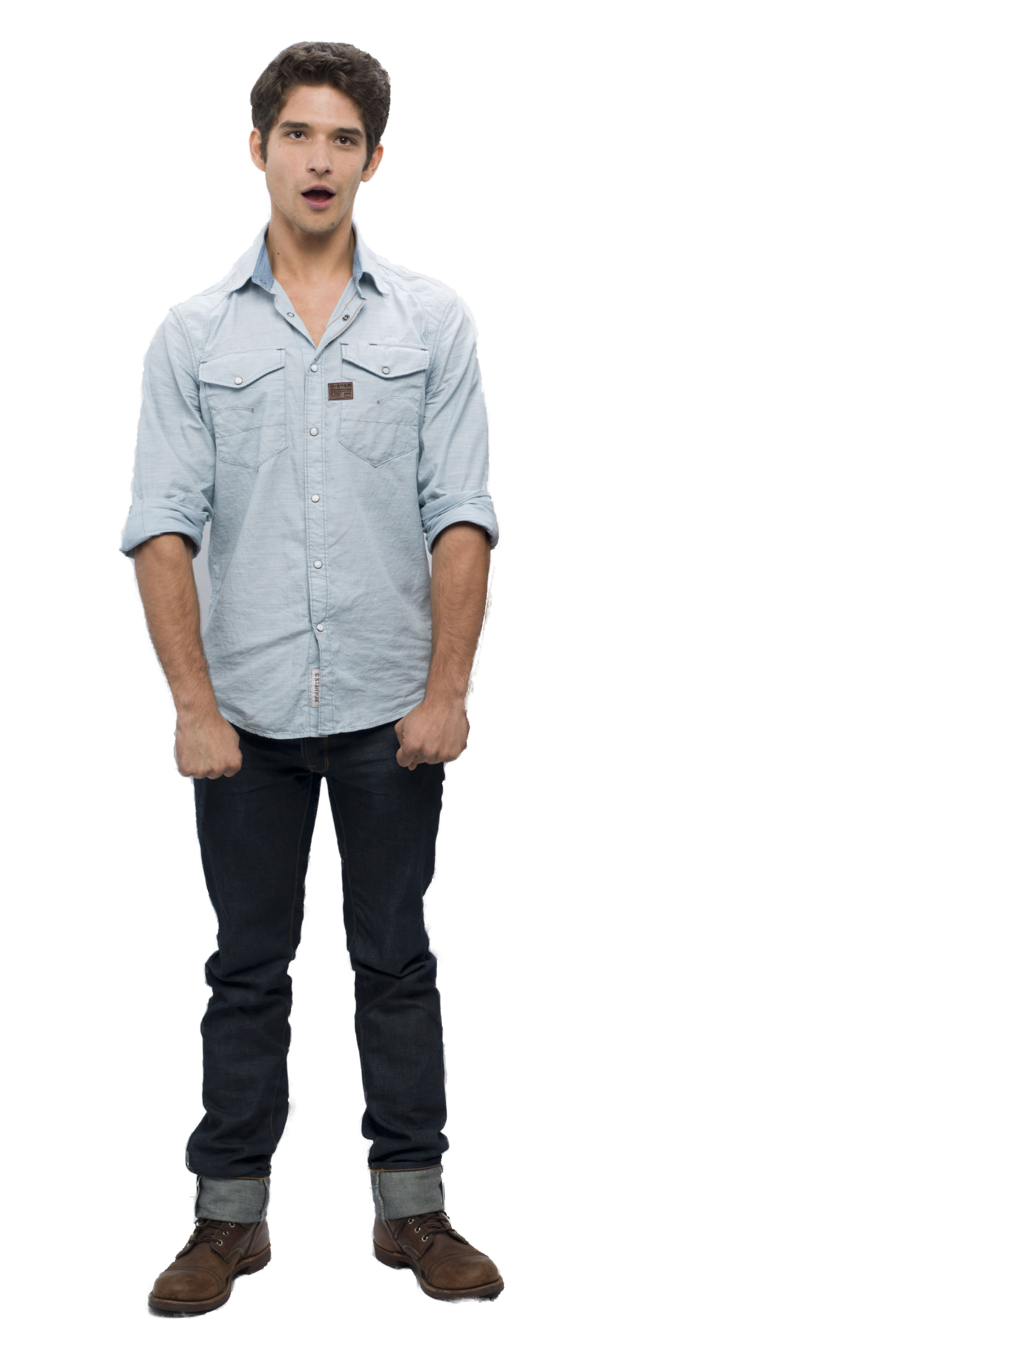 Tyler Posey PNG Free Download